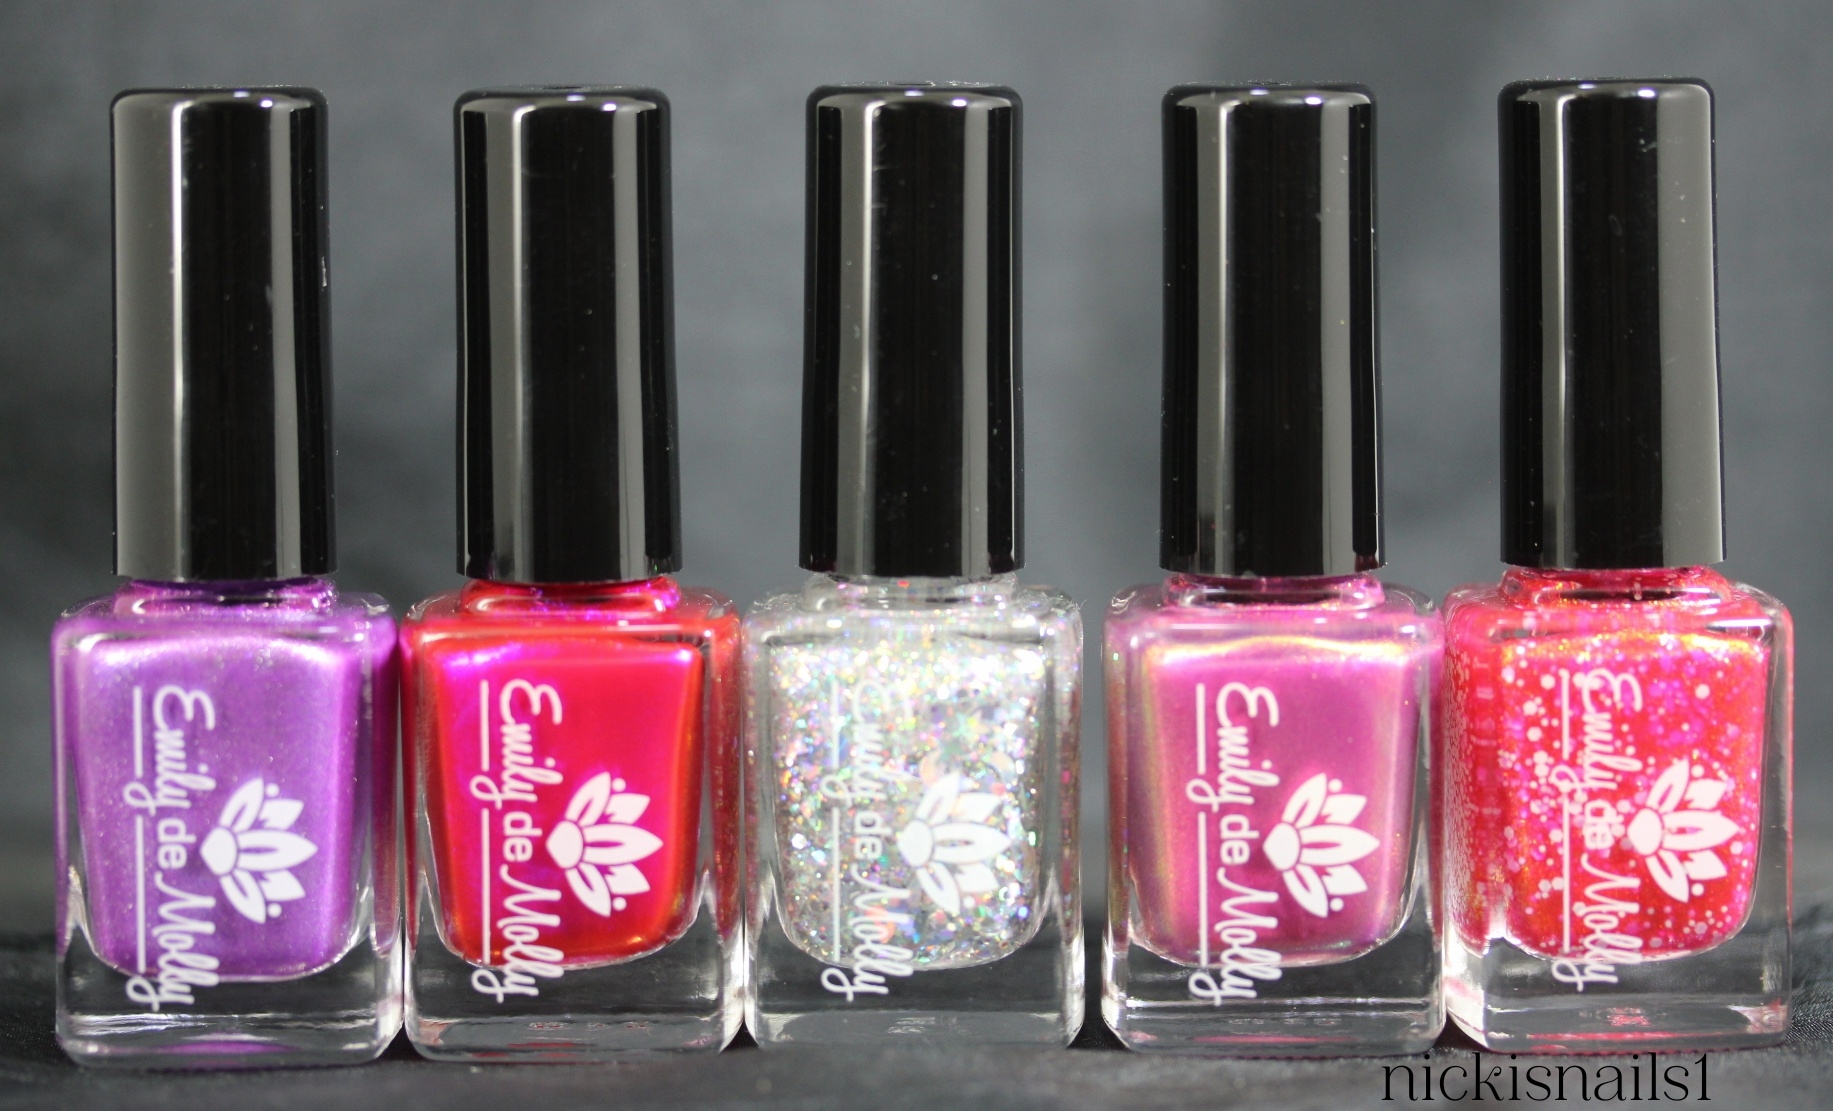 6. Emily de Molly Multichrome Nail Polish - Color Shifting Finishes - wide 1